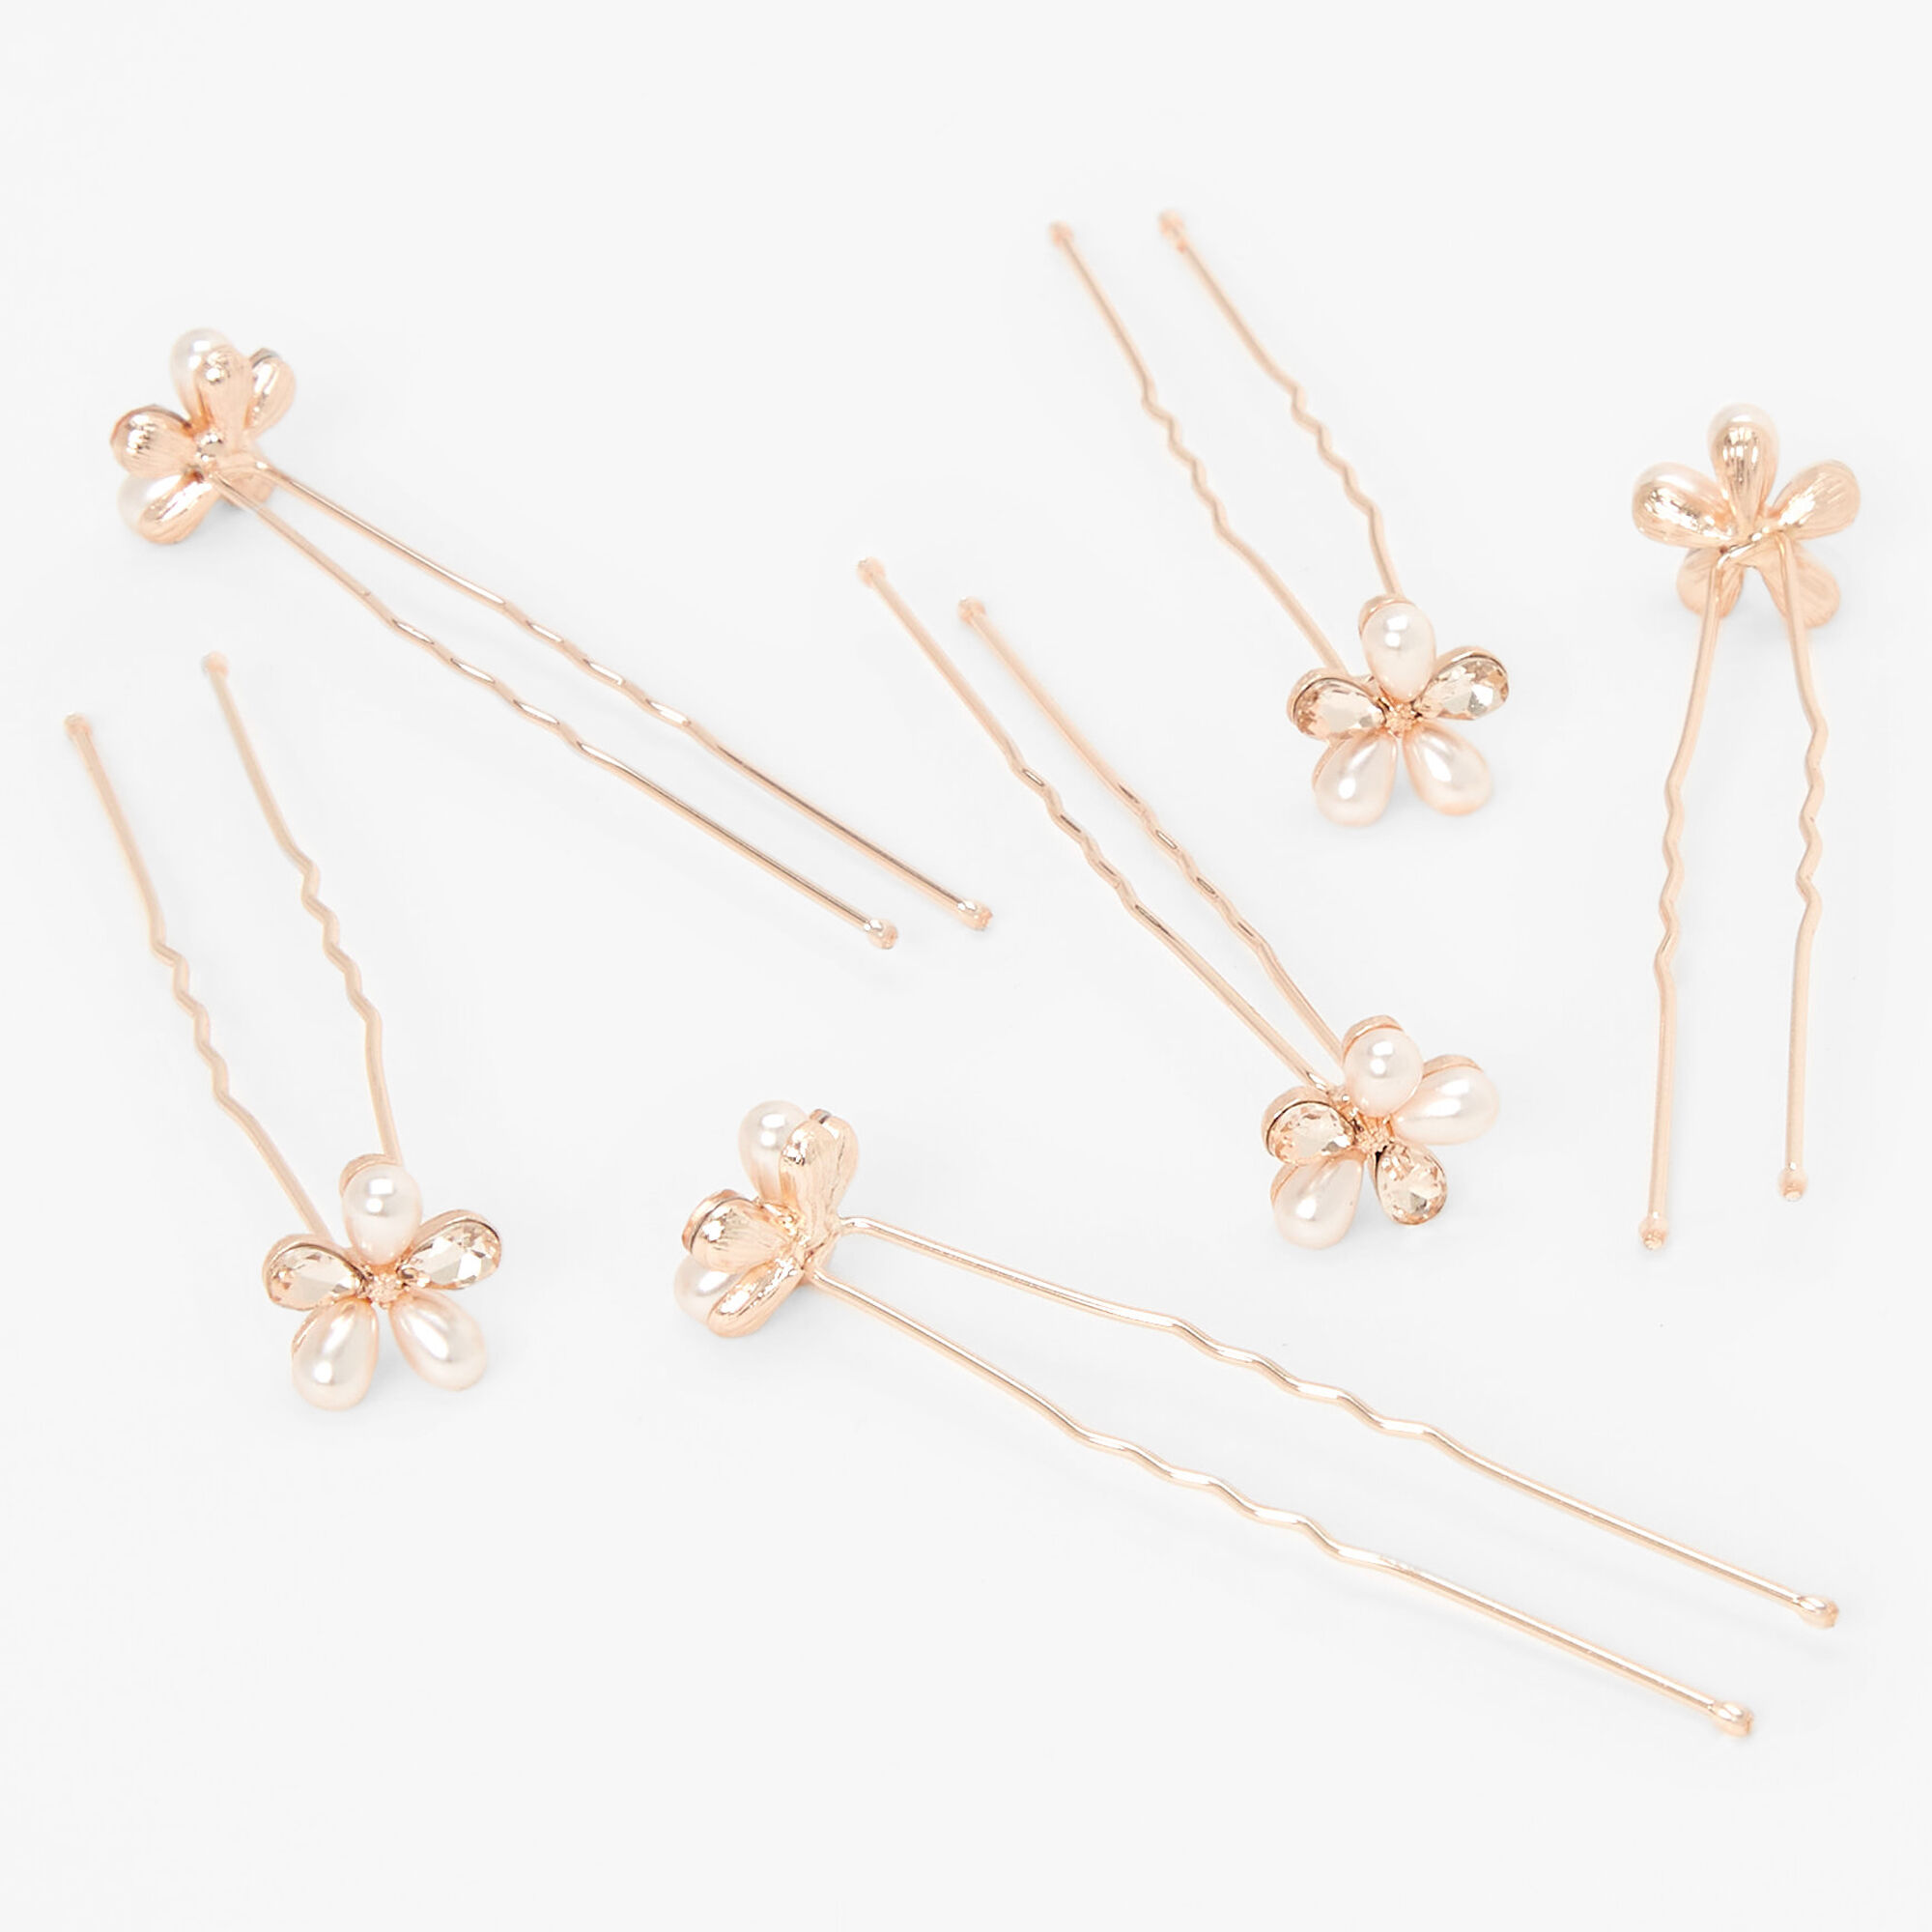 View Claires Rose Daisy Floral Hair Pins 6 Pack Gold information